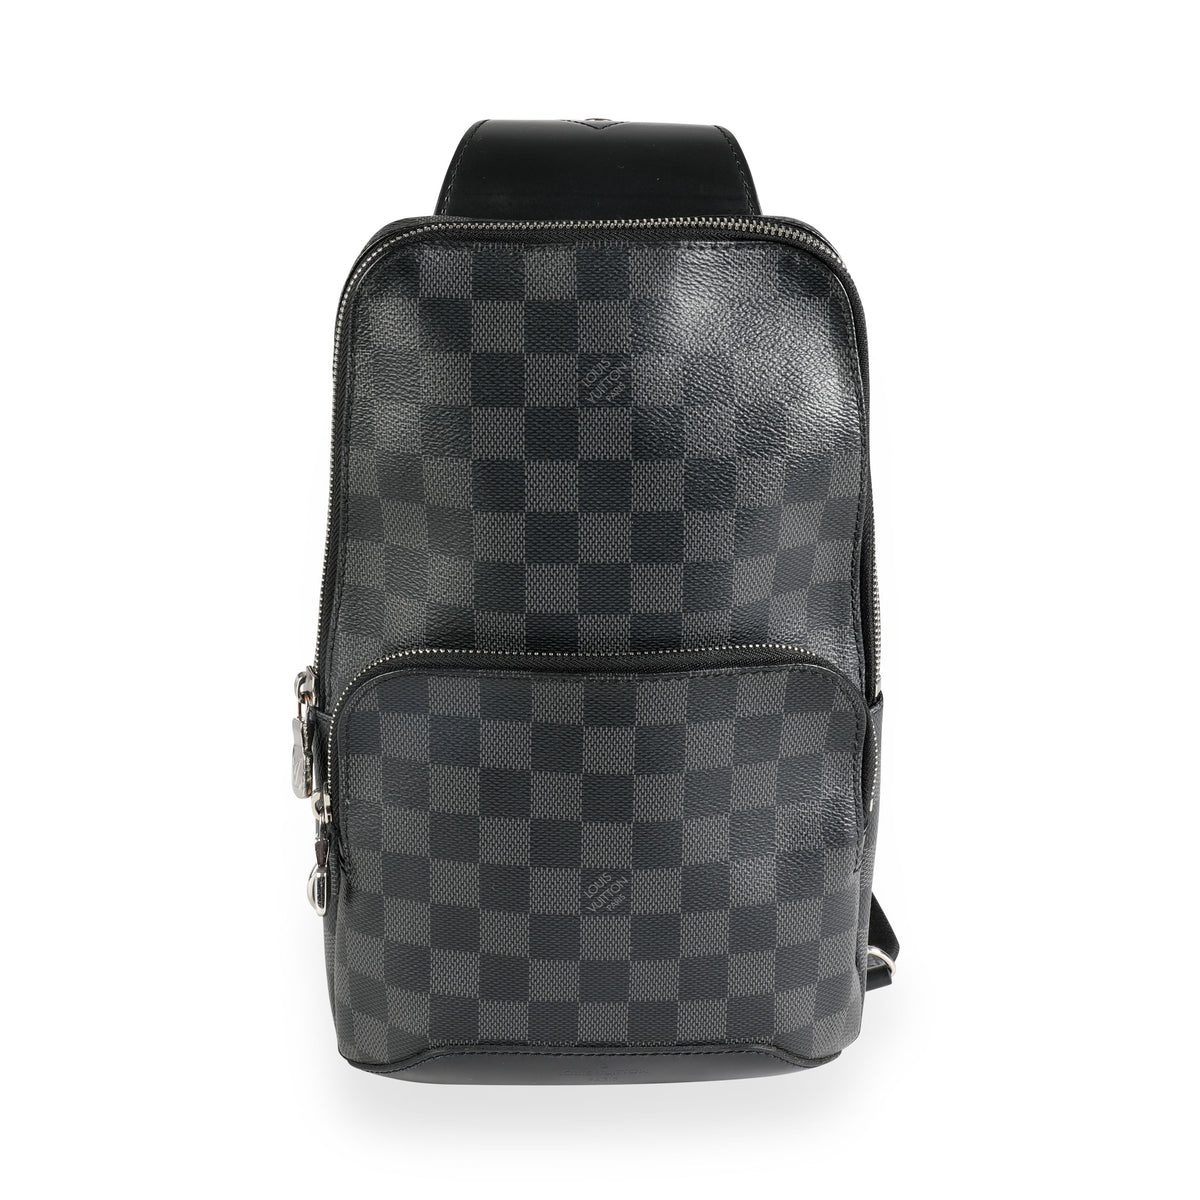 Louis Vuitton X Supreme Christopher Backpack Available For Immediate Sale  At Sotheby's